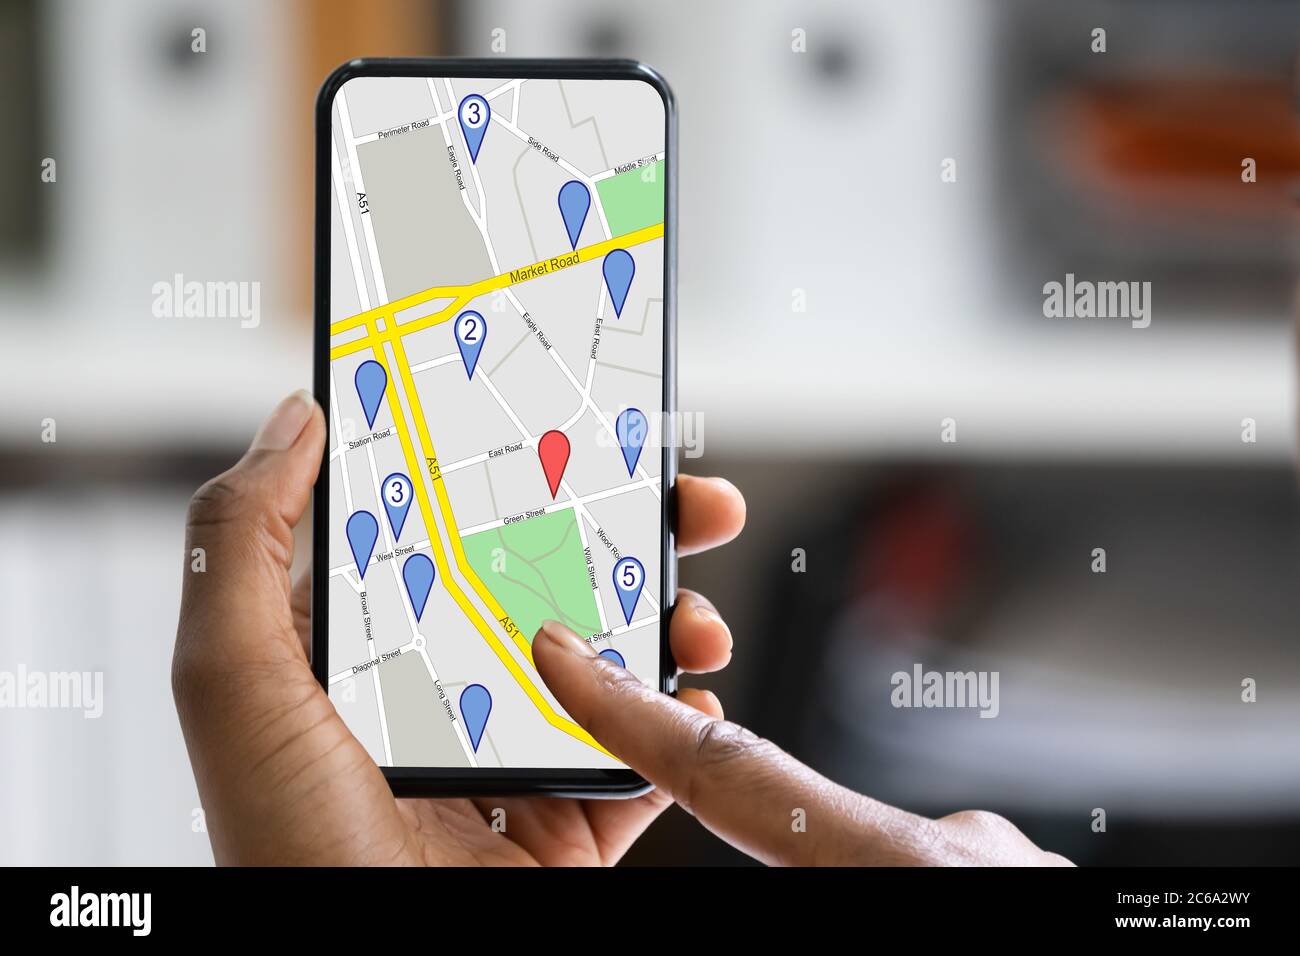 GPS Location Map Search On Mobile Phone Stock Photo - Alamy